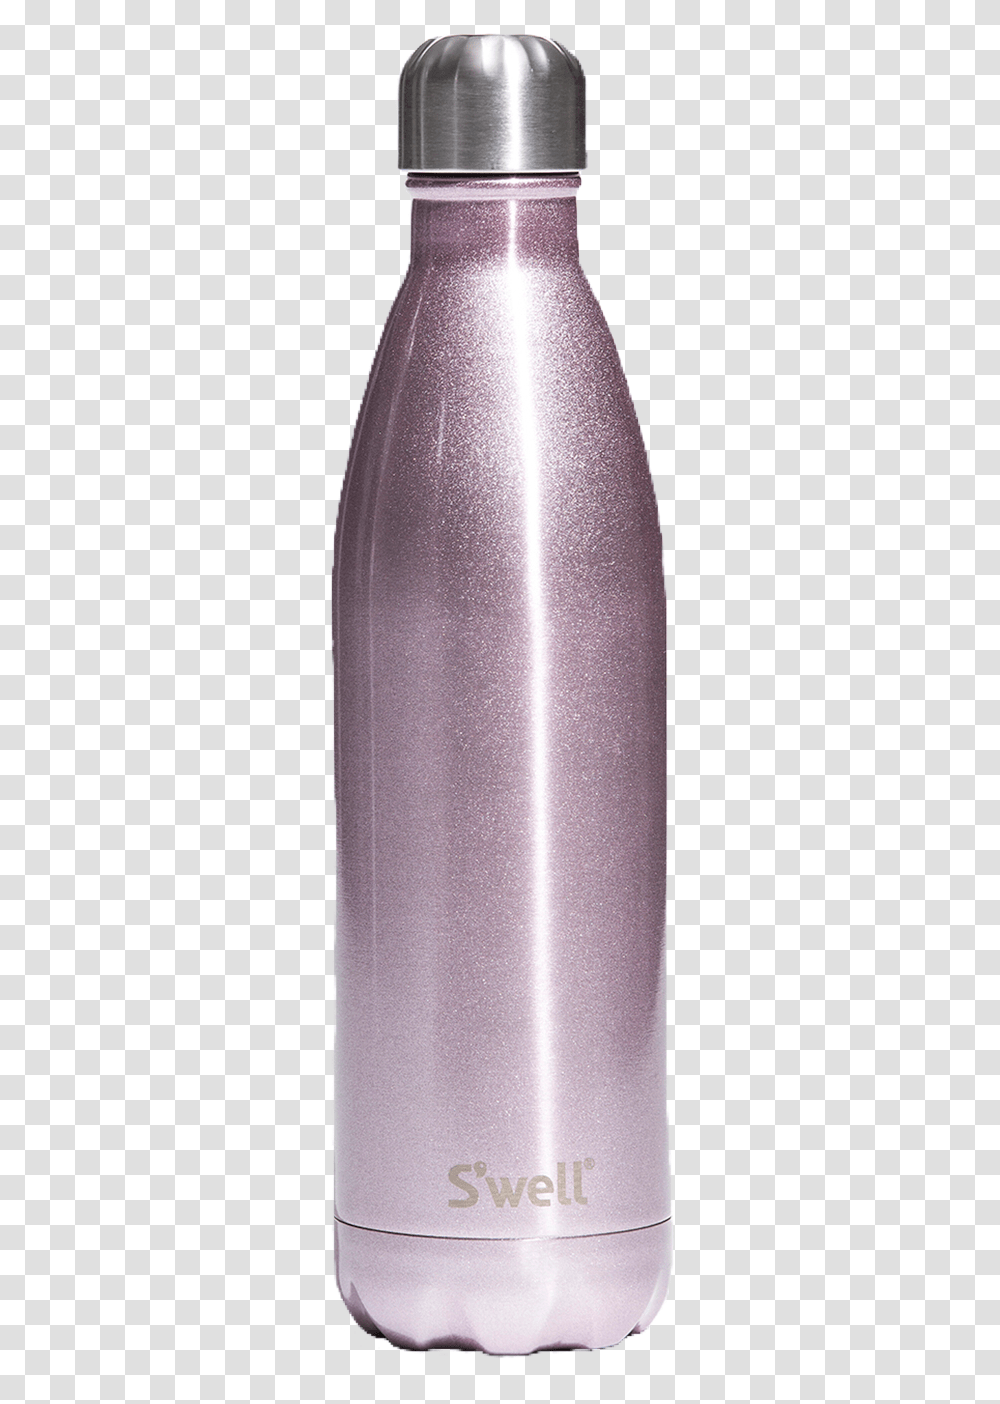 Waterbottle Glitter Purple Swell Cute Aesthetic Water Bottle, Aluminium, Shaker, Tin, Can Transparent Png